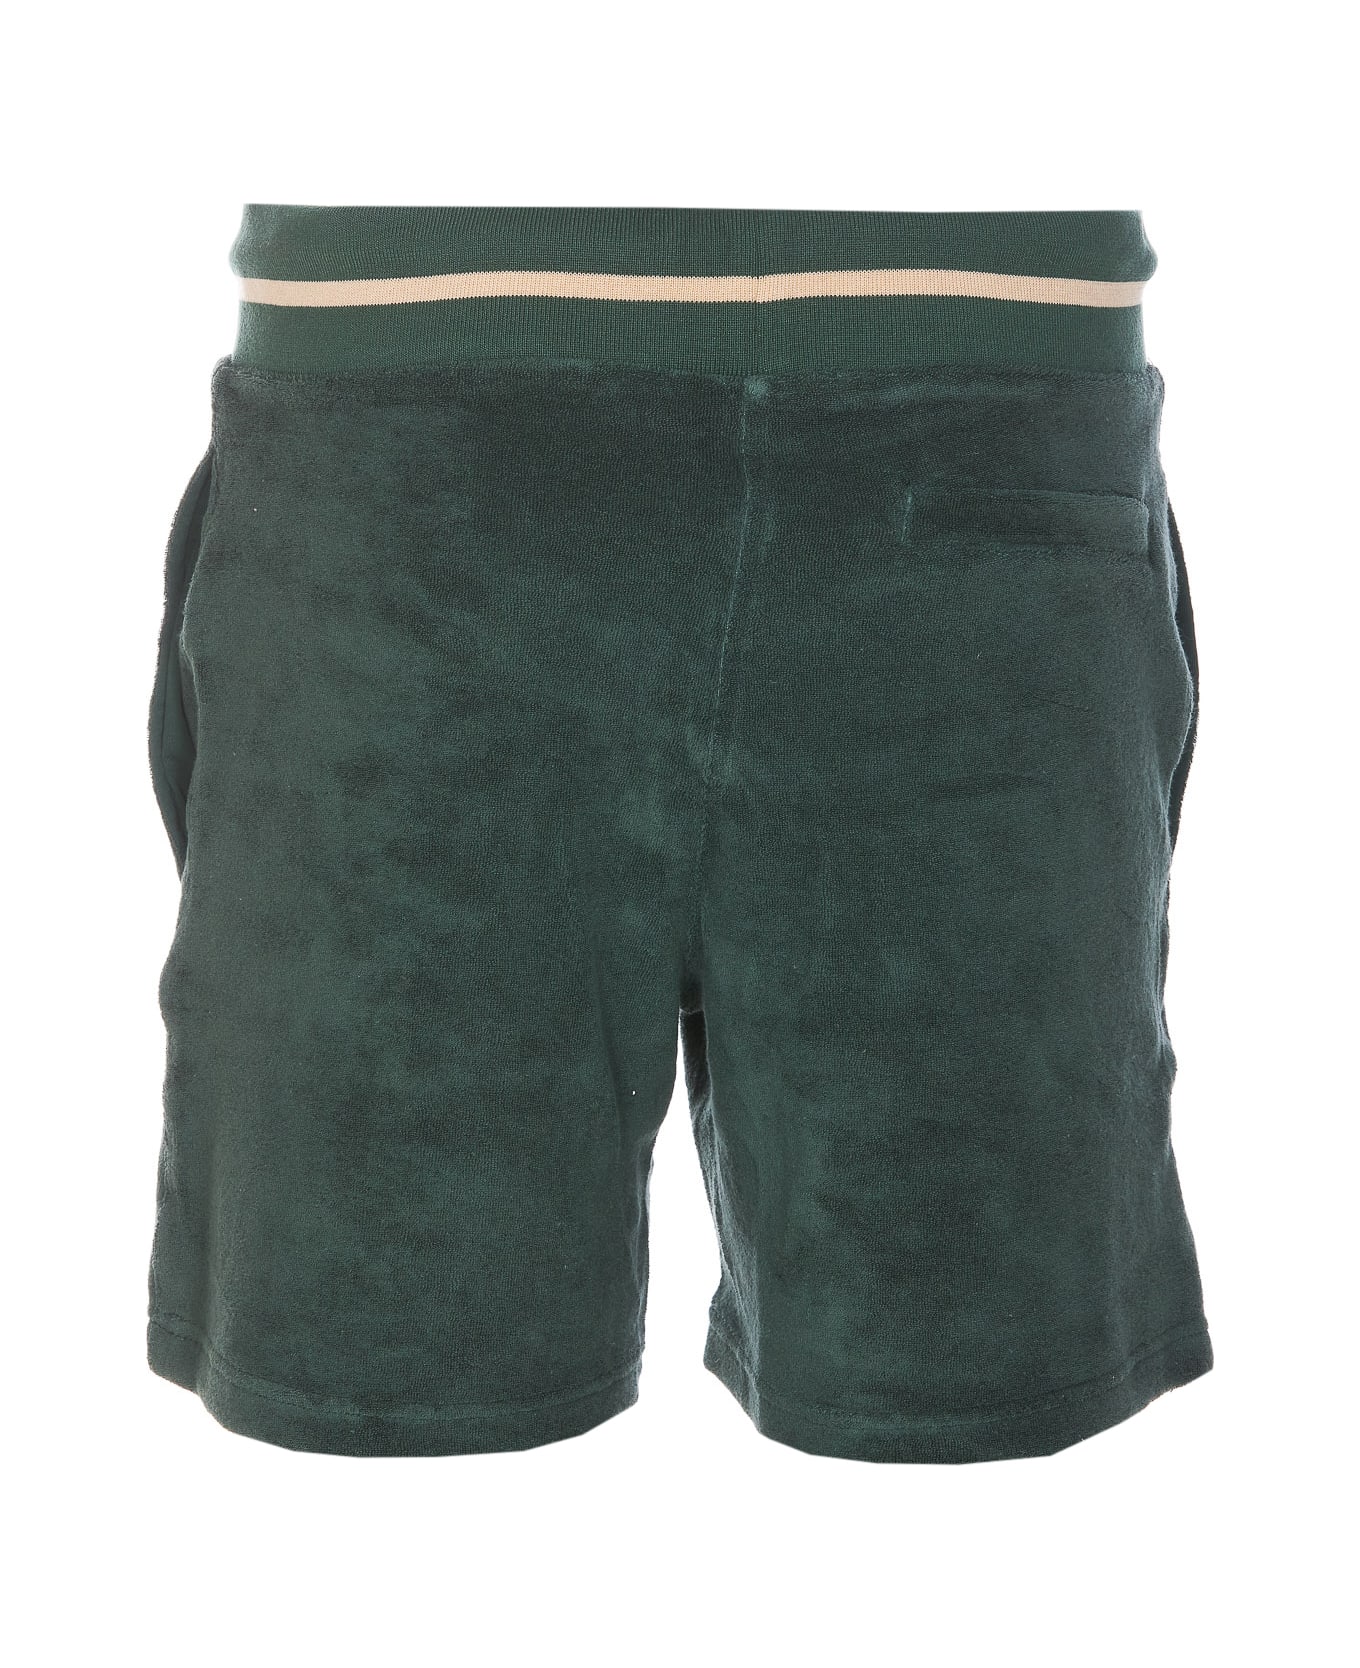 Autry Bermuda Shorts With Drawstring And Staple X Logo Detail In Jersey Man - Green ショートパンツ